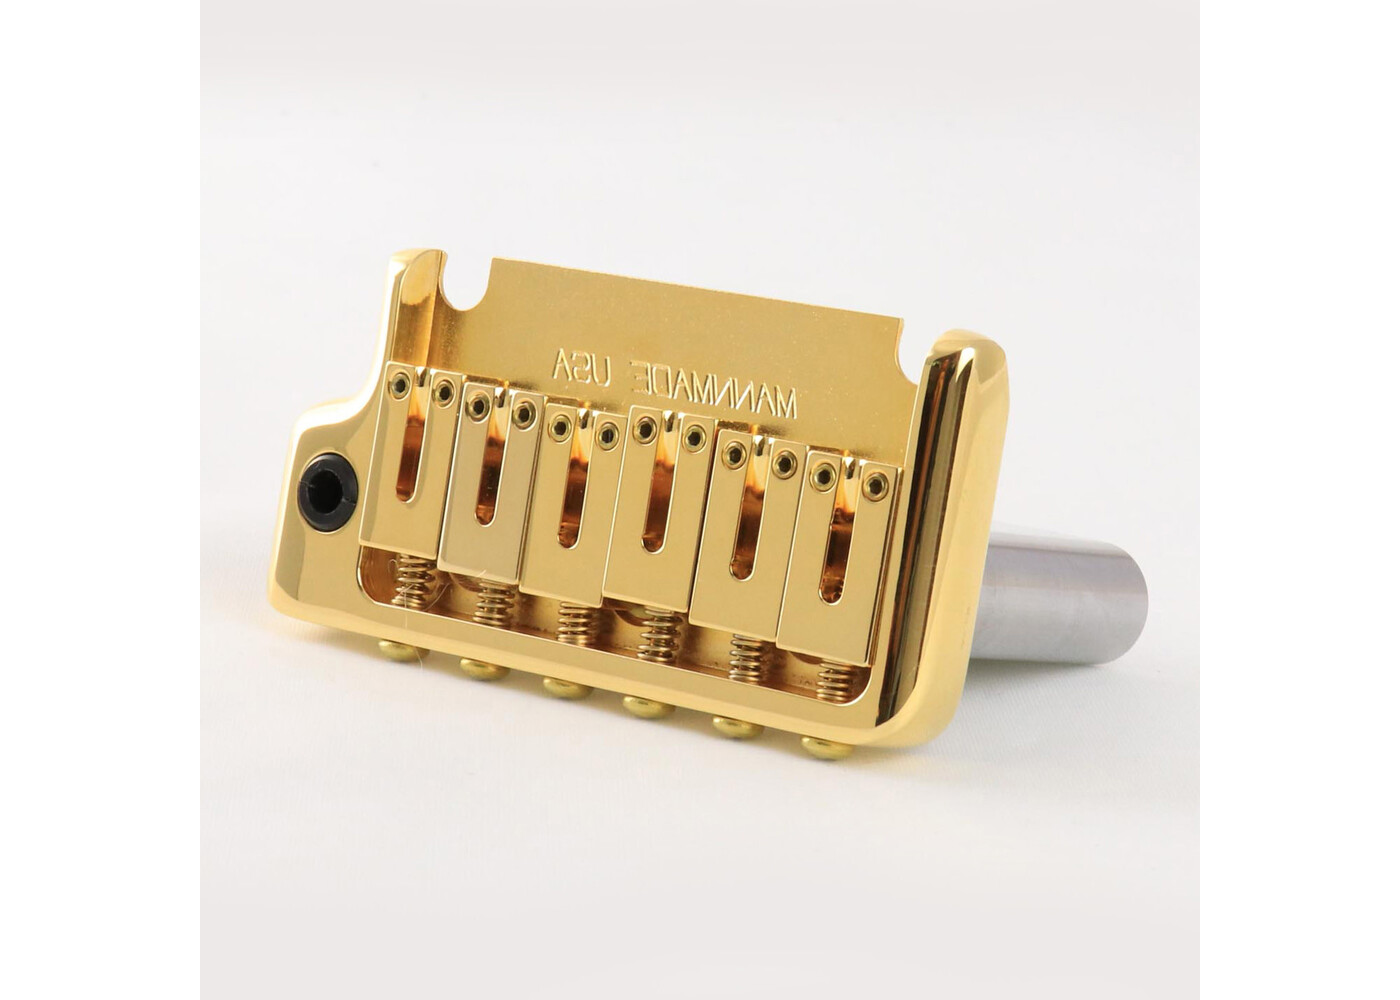 MannMade USA MannMade USA 2-Post Tremolo Bridge - Gold - Left Hand - fits 2 post Strat style guitars